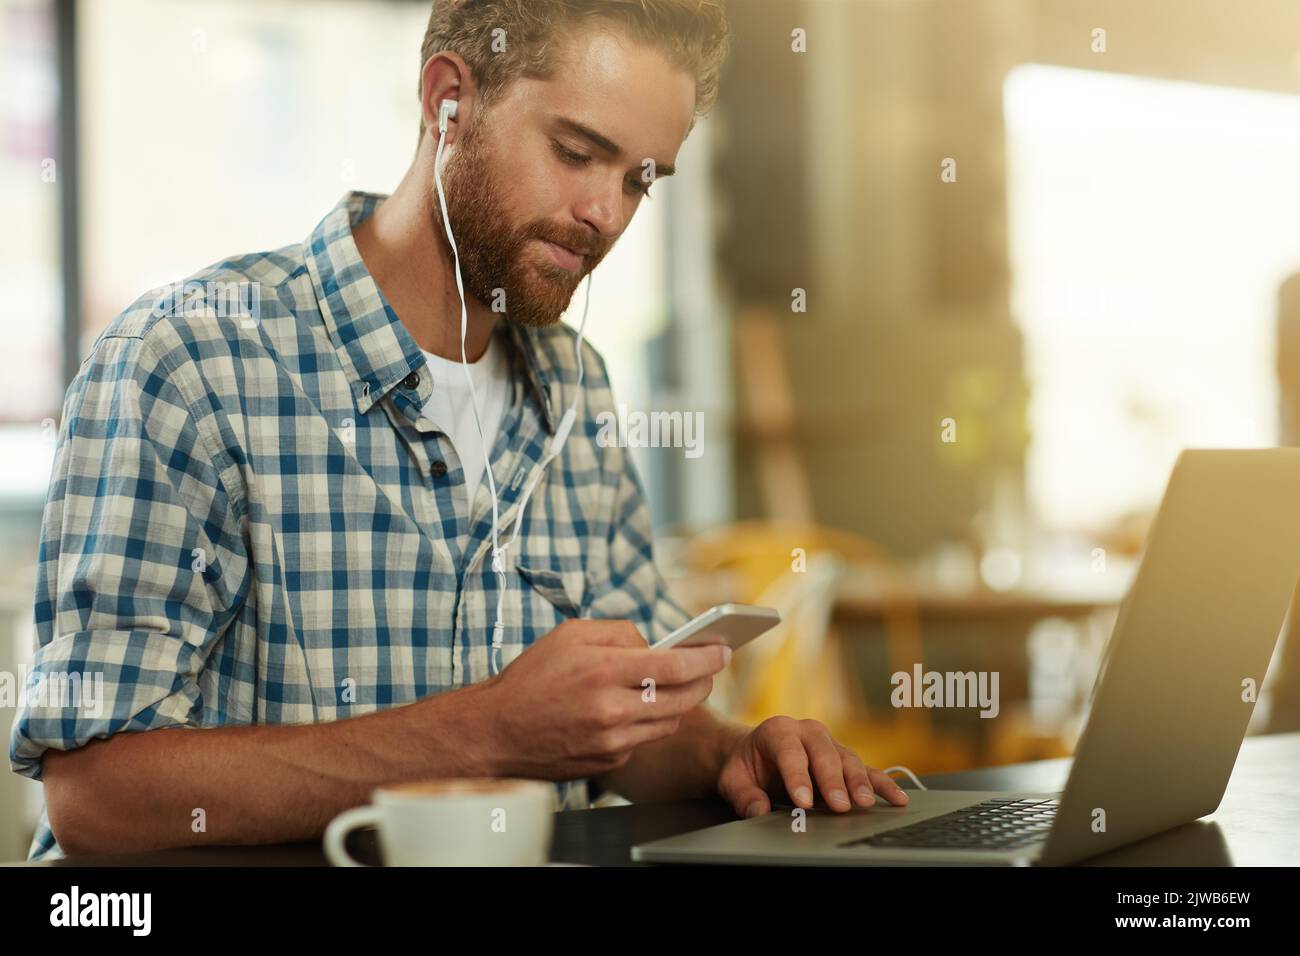 Plans seem to be going smoothly. a young man with earphones using a cellphone and laptop in a cafe. Stock Photo